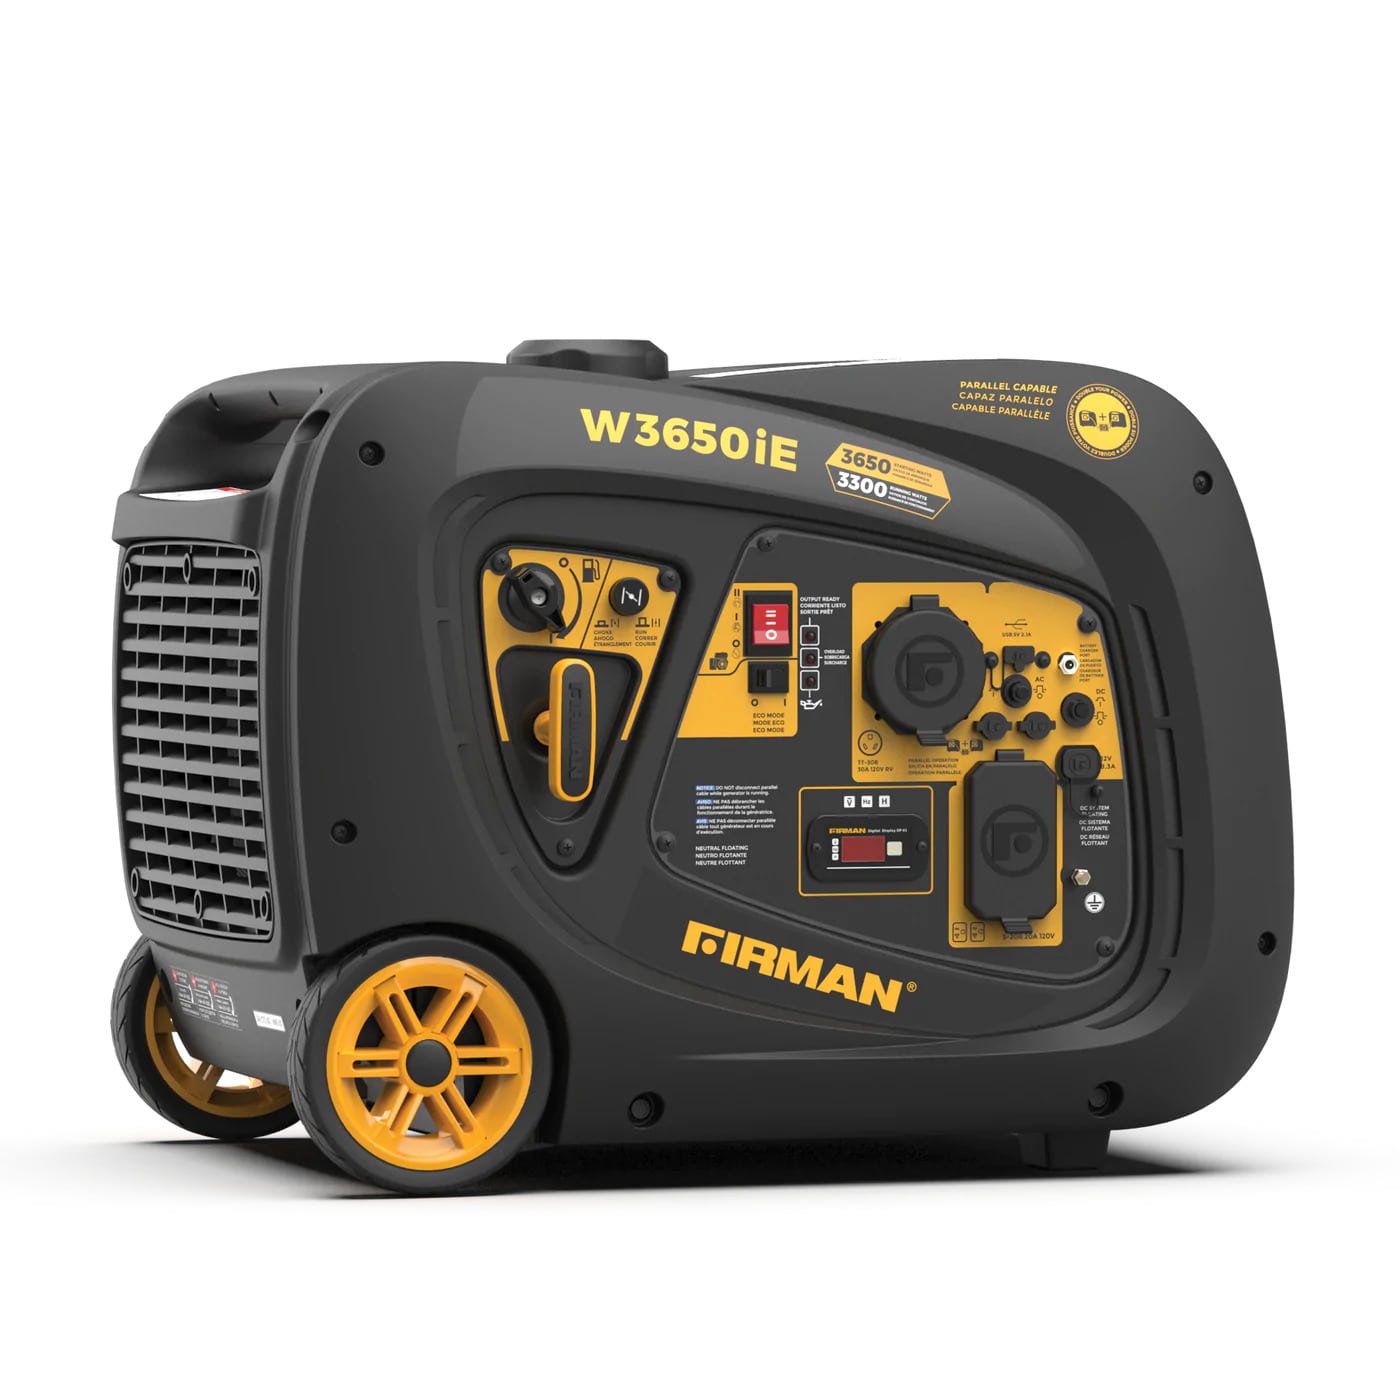 How to operate a portable generator